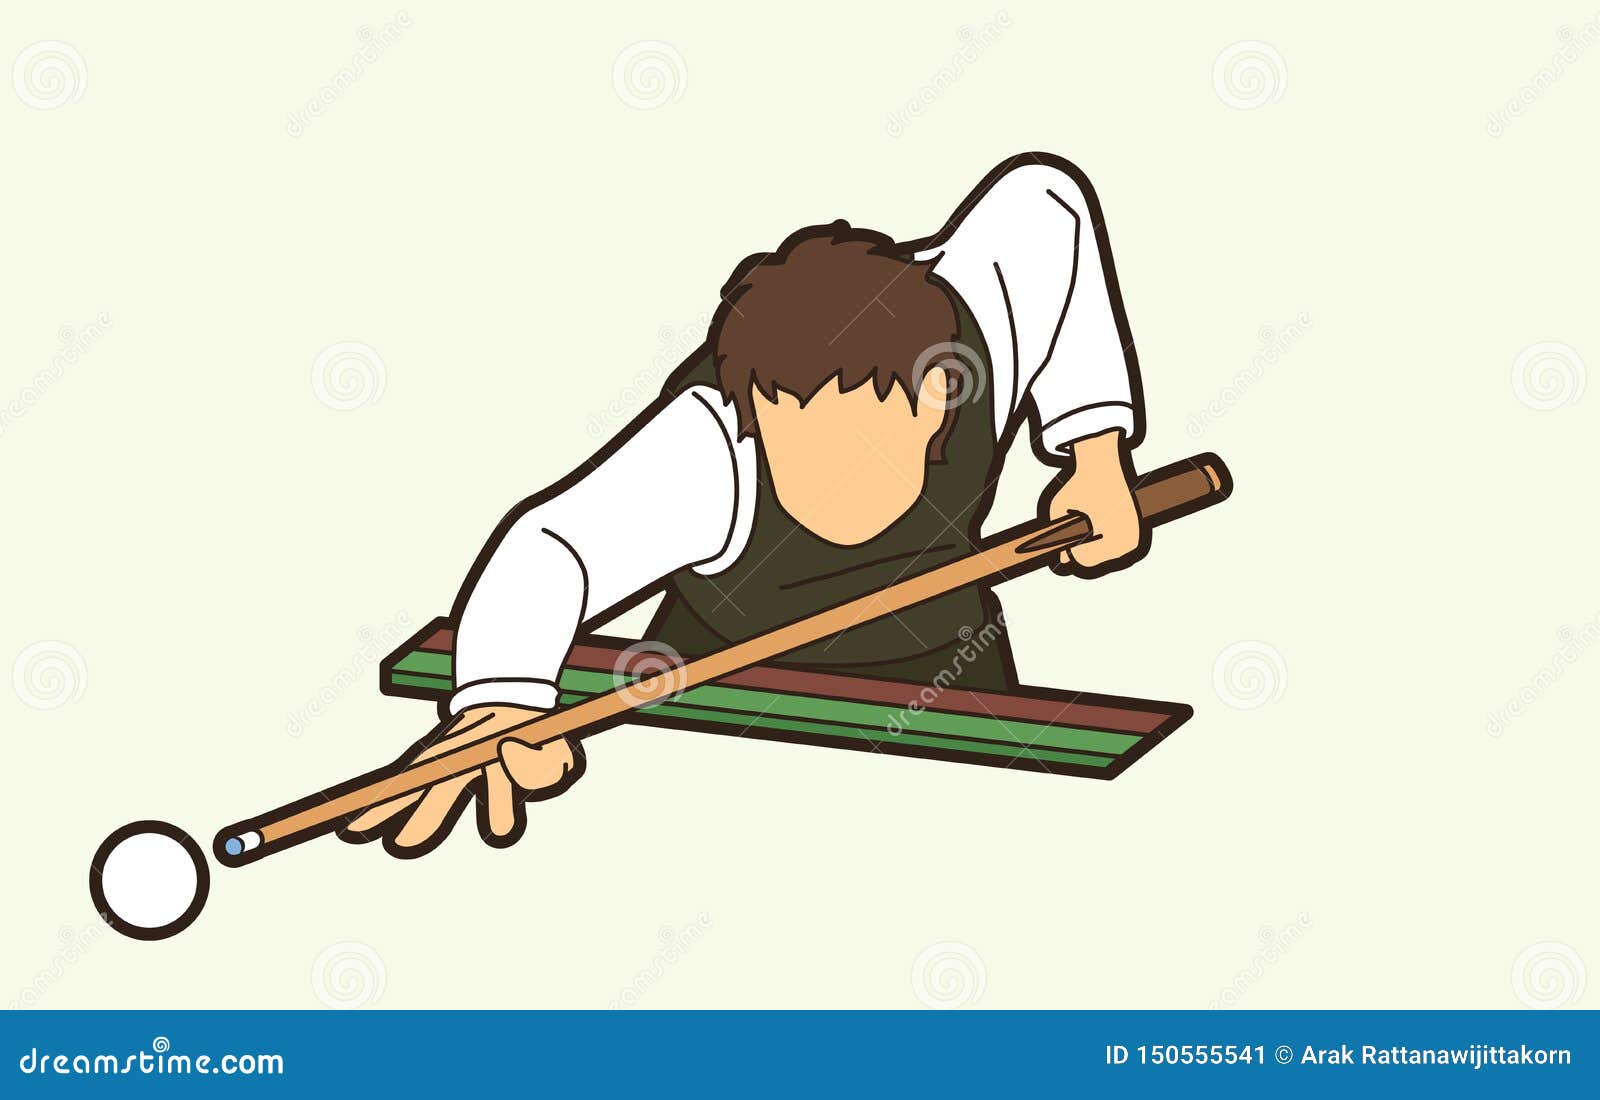 Snooker Sport Action Cartoon Graphic Stock Vector - Illustration of hobby,  element: 150555541